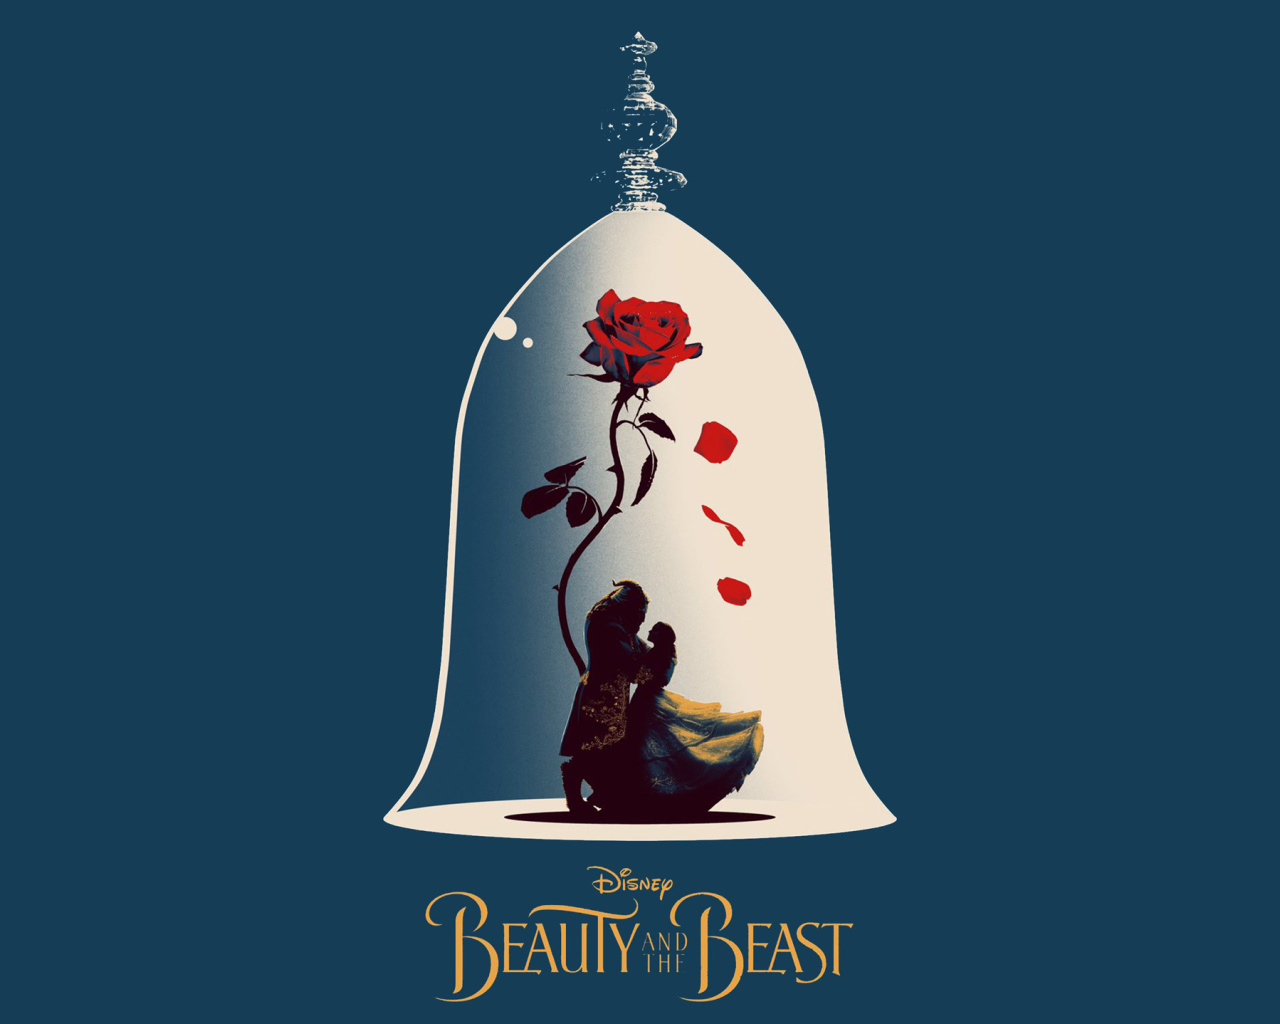 Beauty and the Beast Poster wallpaper 1280x1024